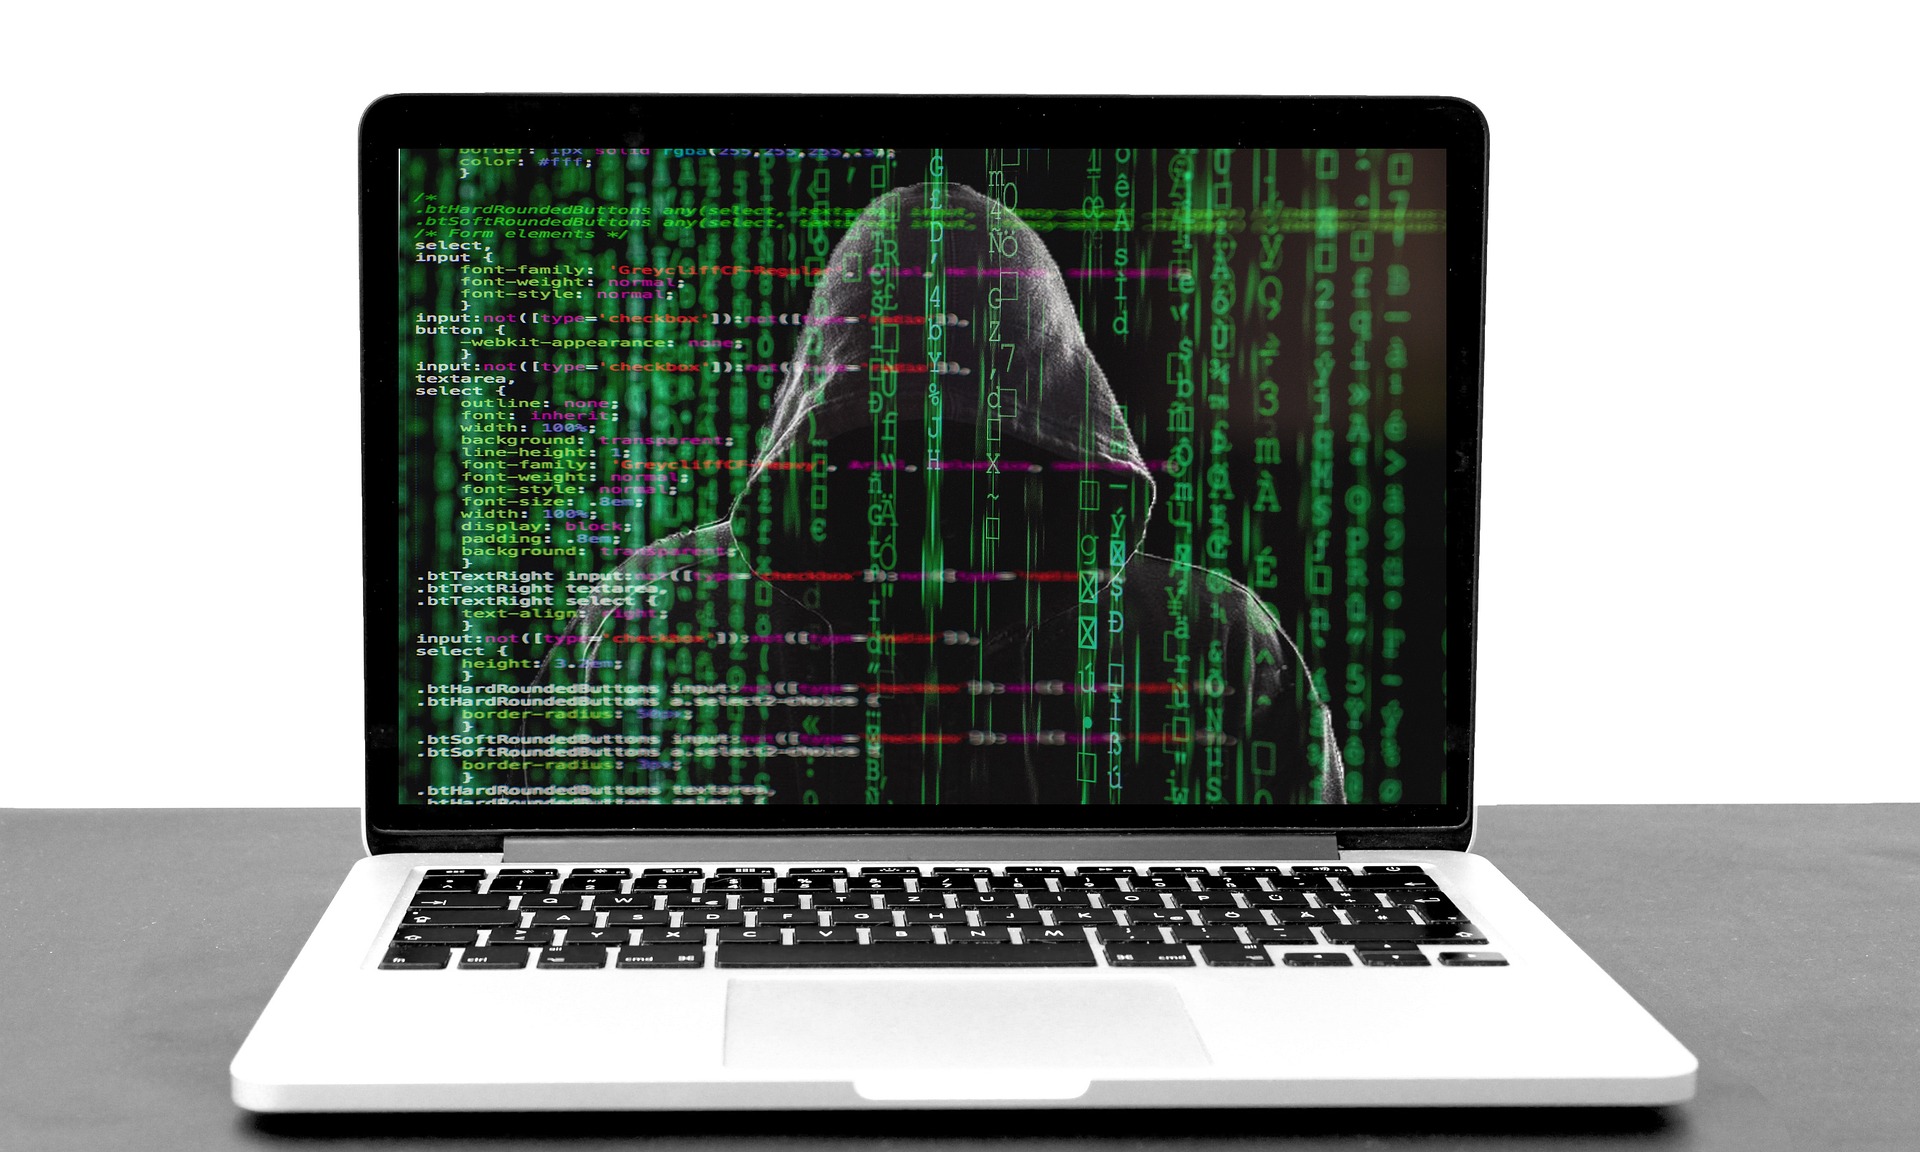 A Laptop with the screen on, showing code in green and red and white text, with the silhouette of a person with their hood covering their face behind the text; our Conveyancing Solicitors in Lancaster discuss Conveyancing fraud, and how we take steps to prevent it.